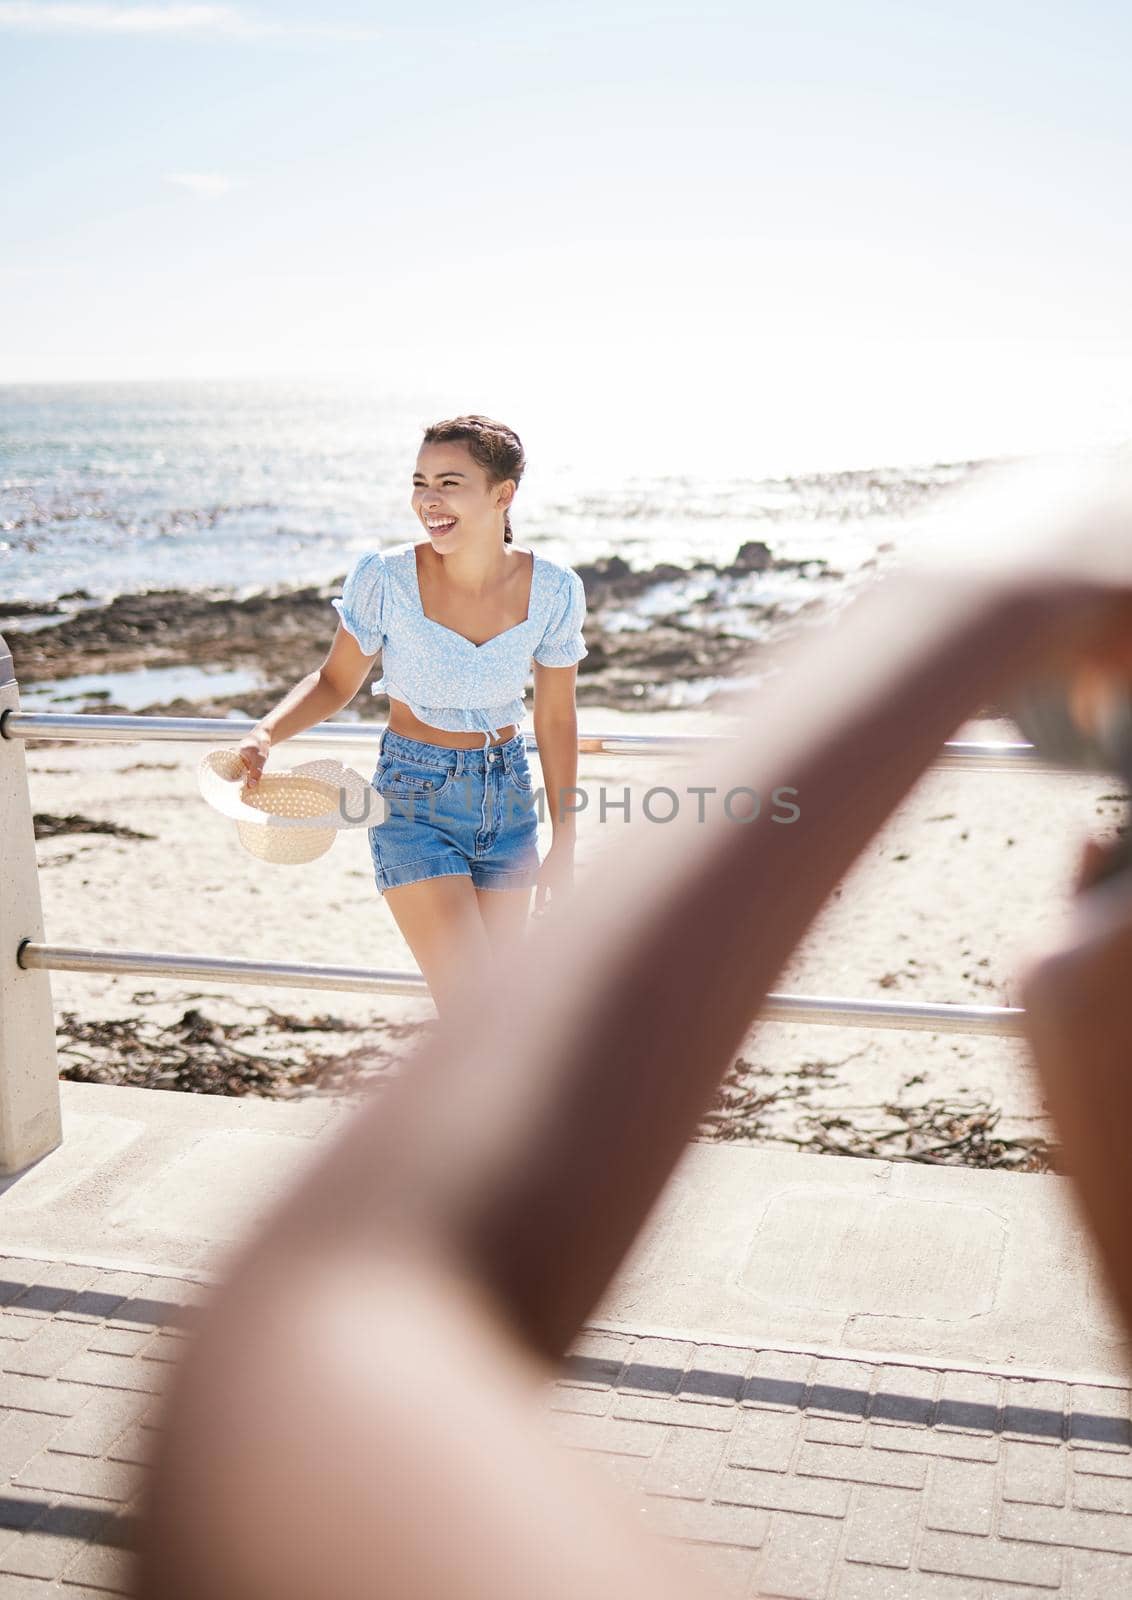 Beach travel photography of social media woman influencer on summer holiday or seaside water vacation destination. Happy, smile or excited young girl enjoy ocean, sand and blue sky sunset Hawaii trip.